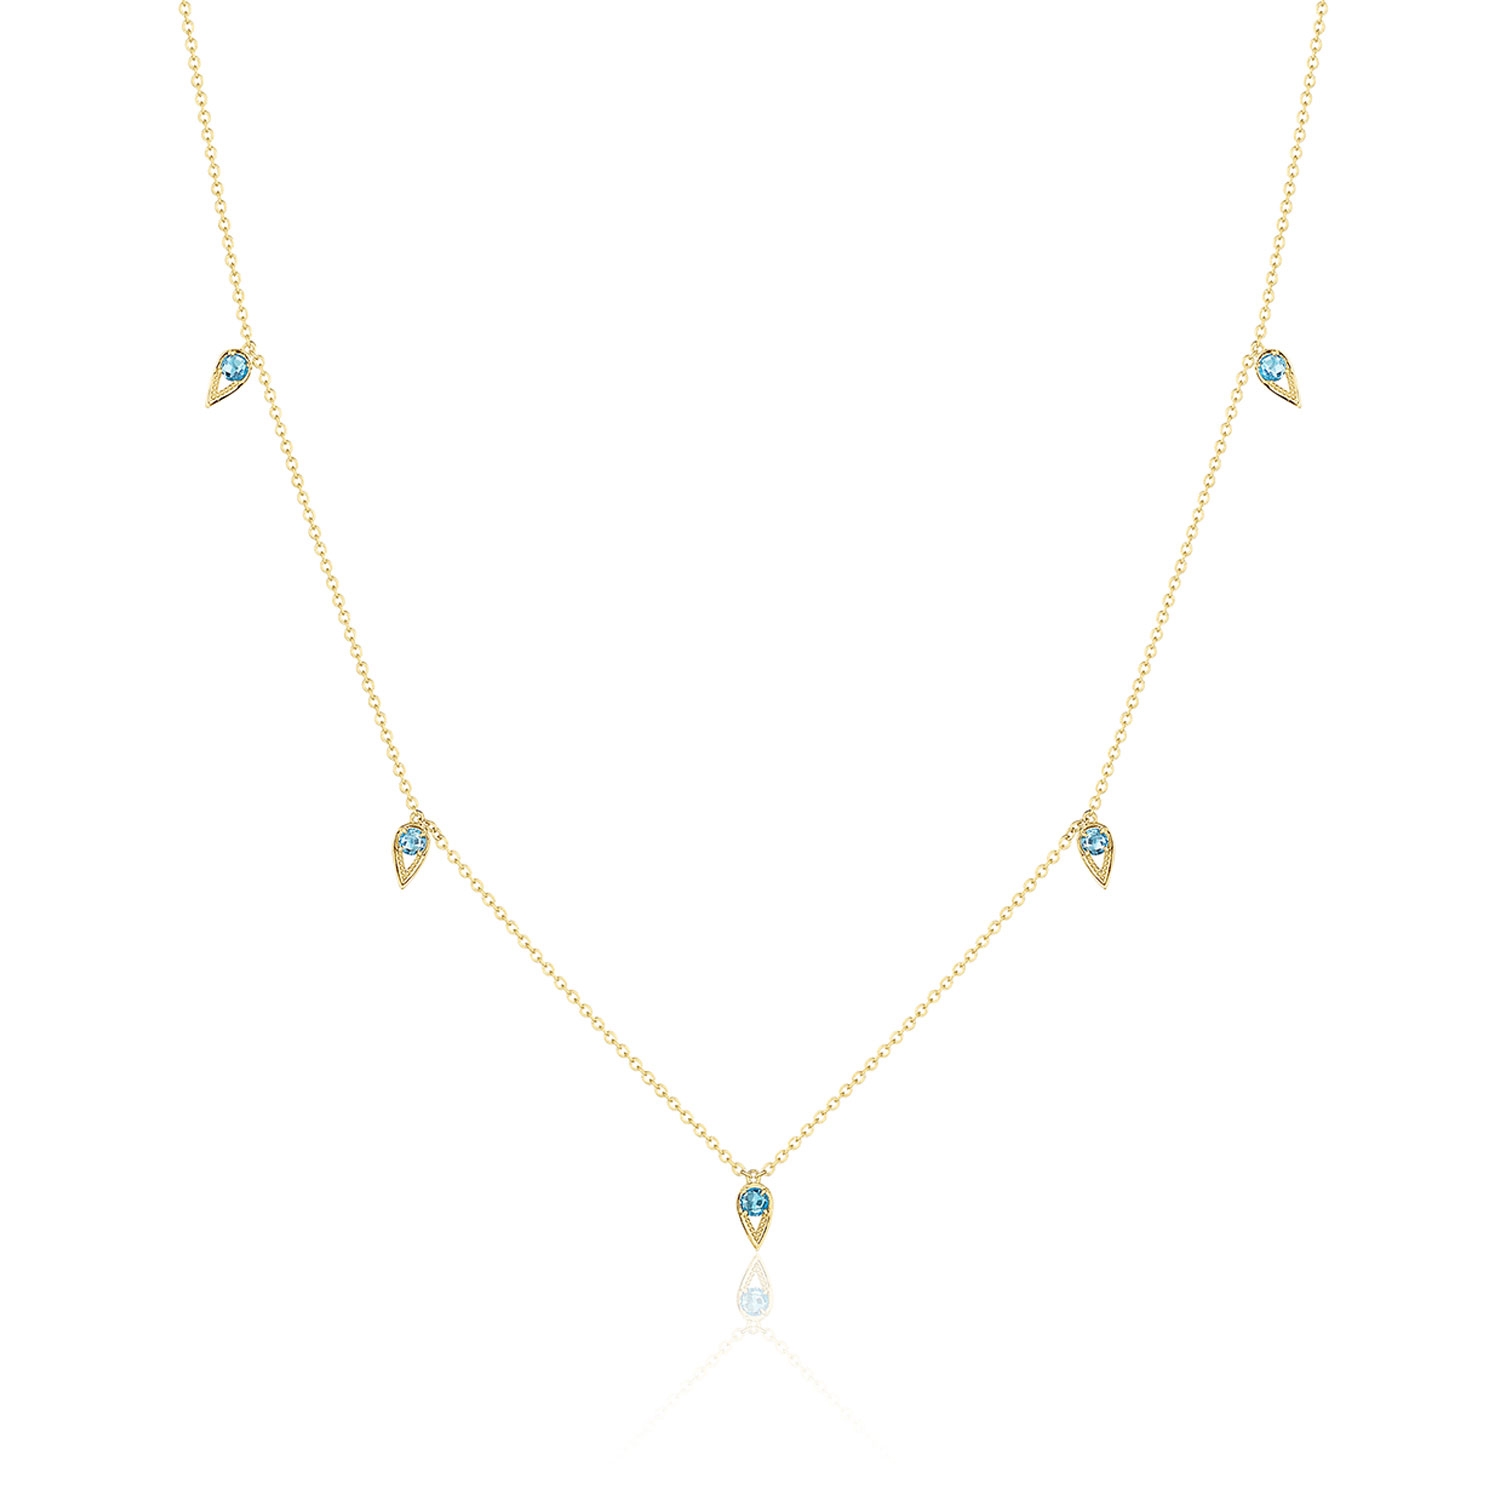 Tacori SN24433FY 5-Station Open Crescent Gemstone Necklace with London Blue Topaz